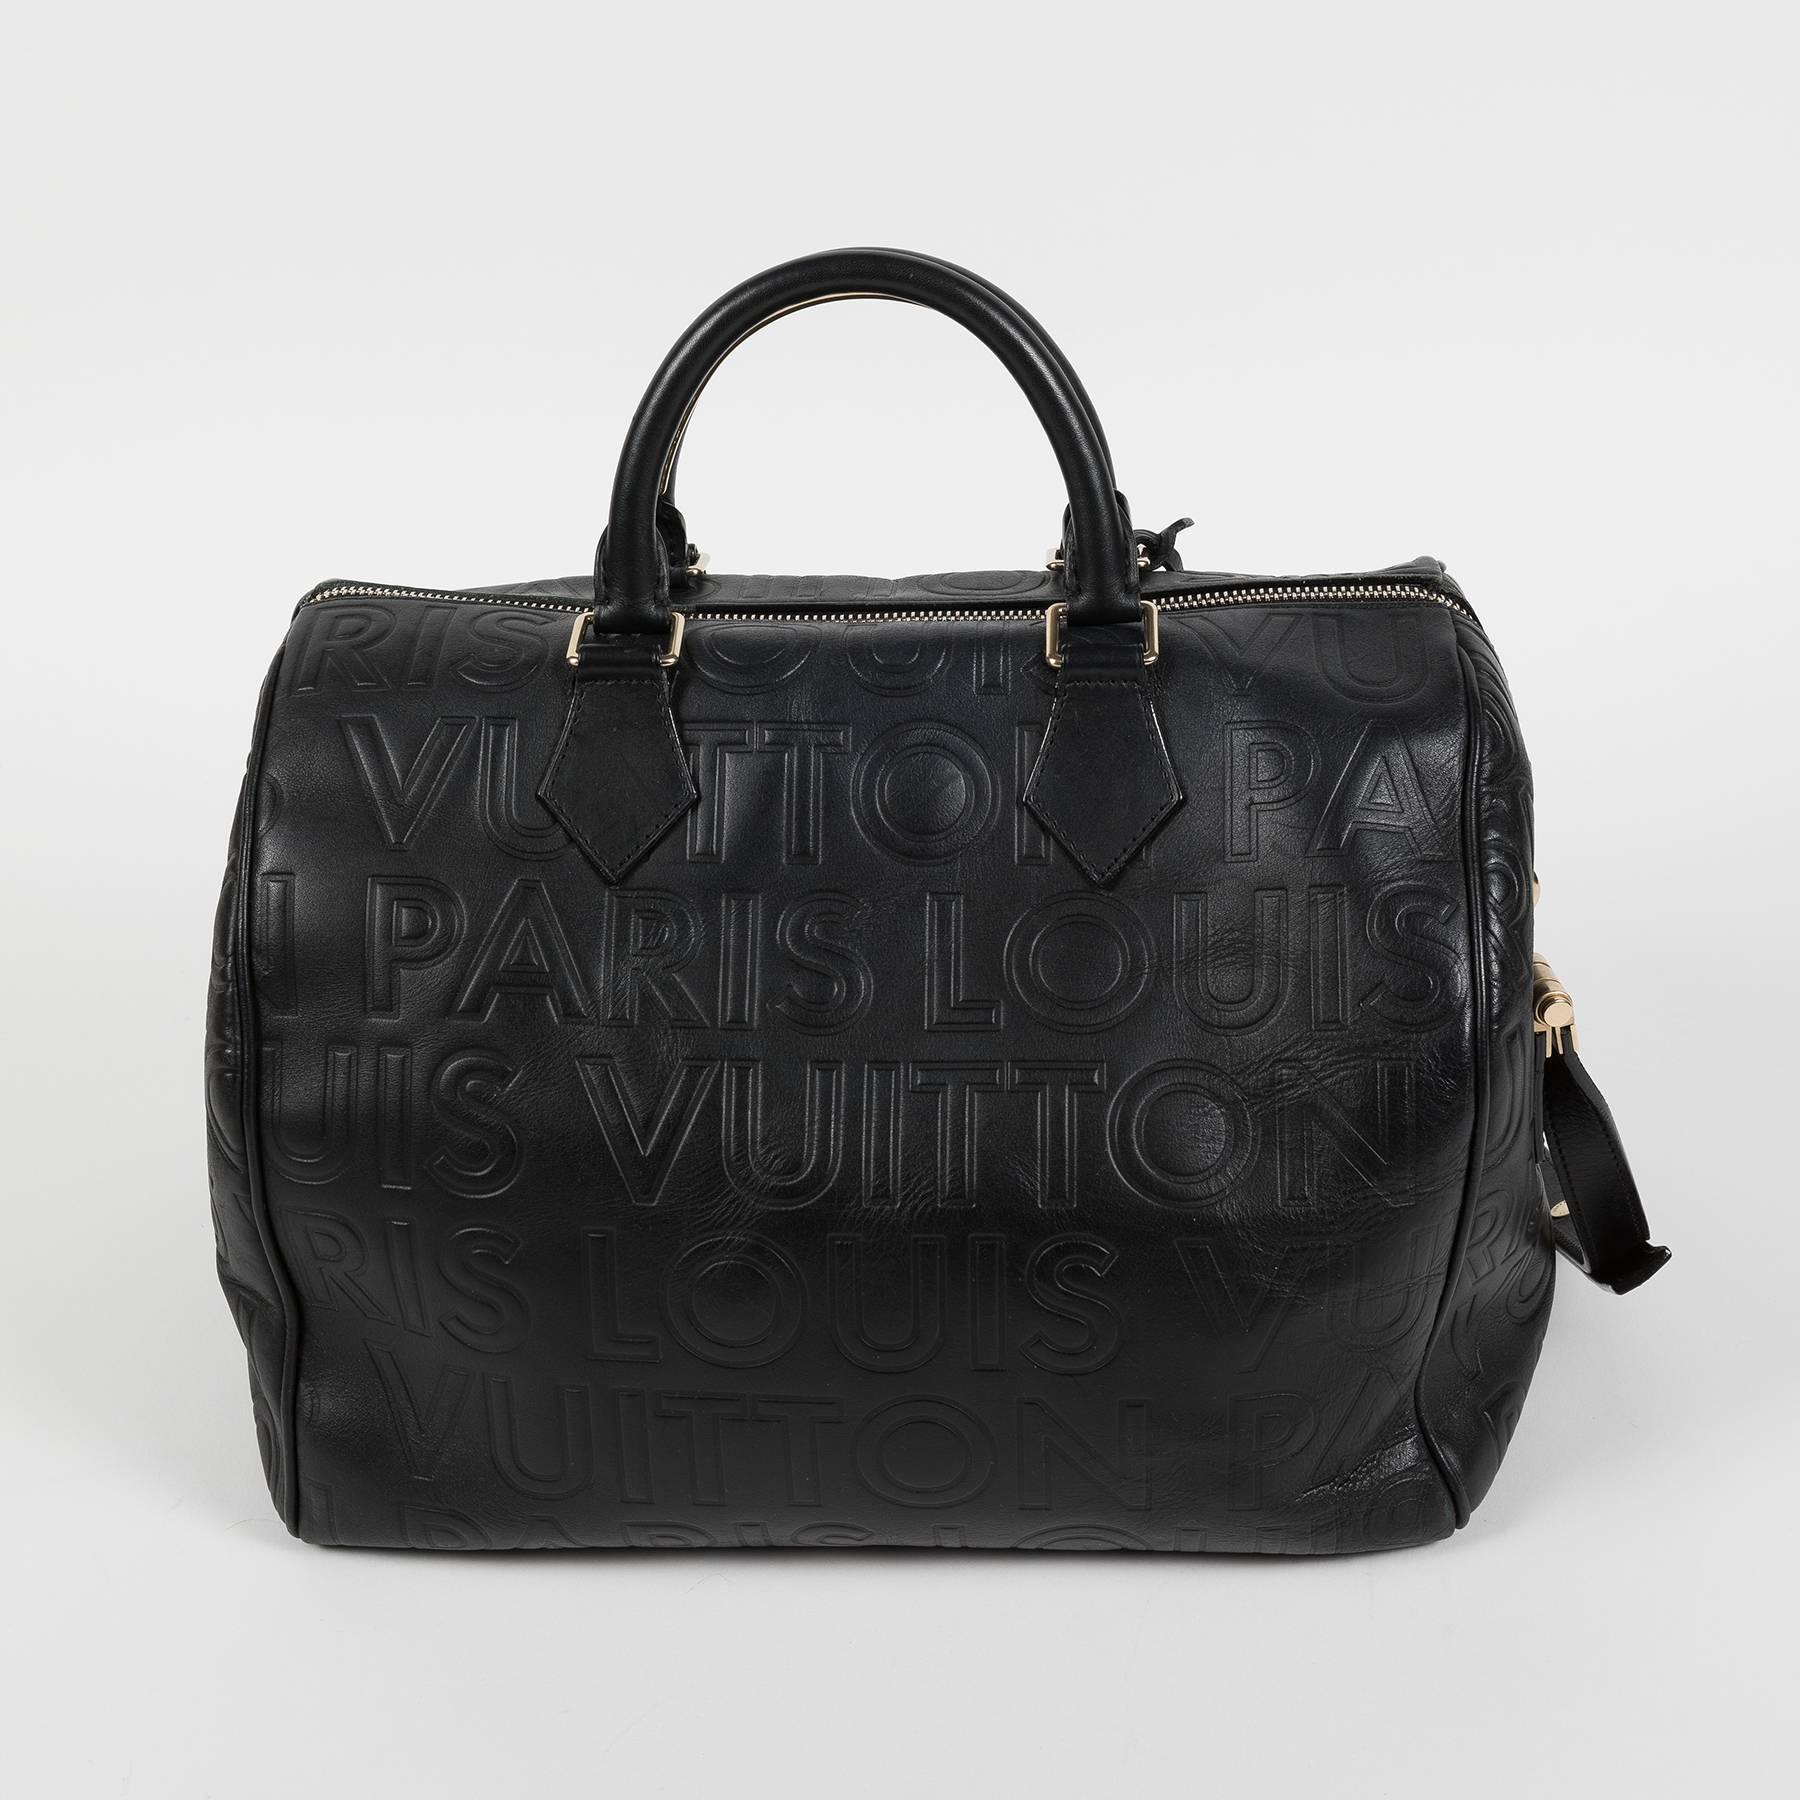 Louis Vuitton limited edition bag in black leather.
Fall Winter 2008 Collection.
Mod. Speedy, with strap.
With lock, keys and dustbag.
Good condition, with only light signs of wear.